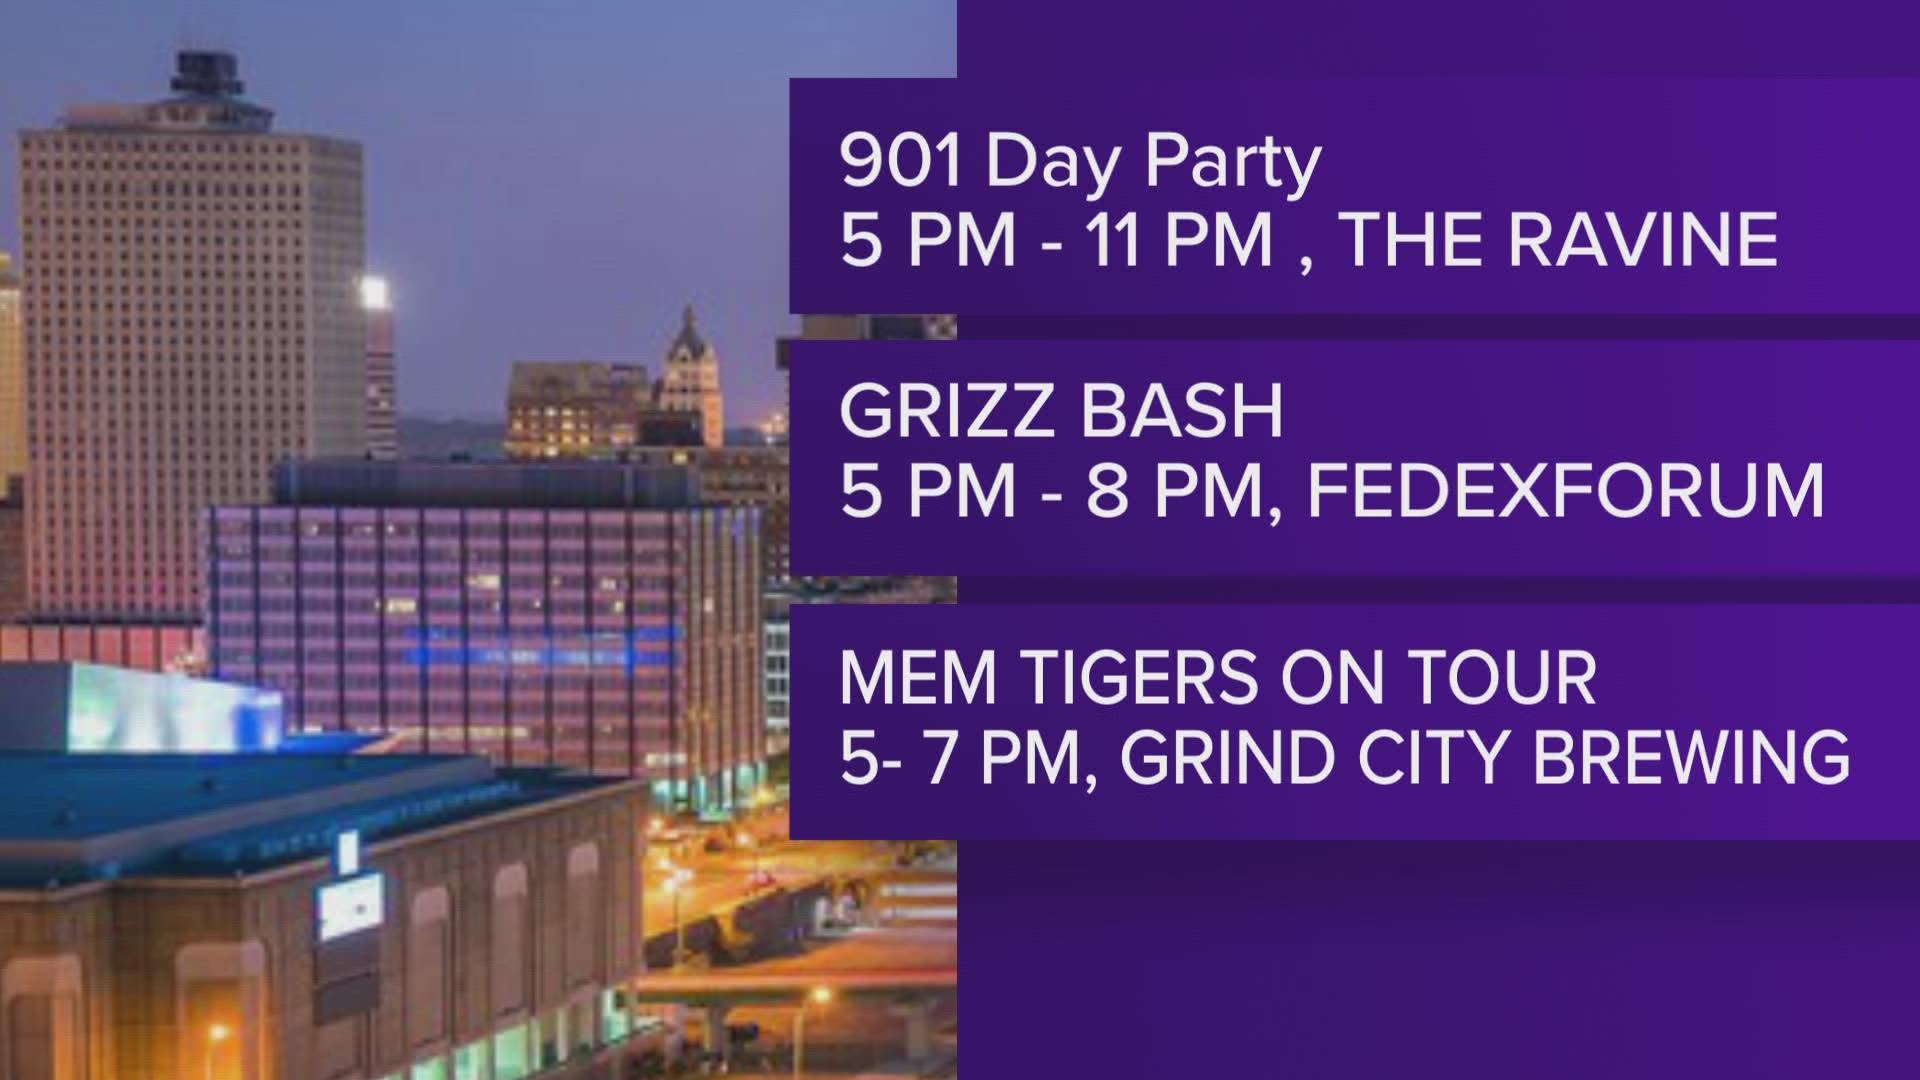 For a full list of activities and discounts set to celebrate 9/01/2022 in the city of Memphis, text "901Day" to (901)-321-7520.